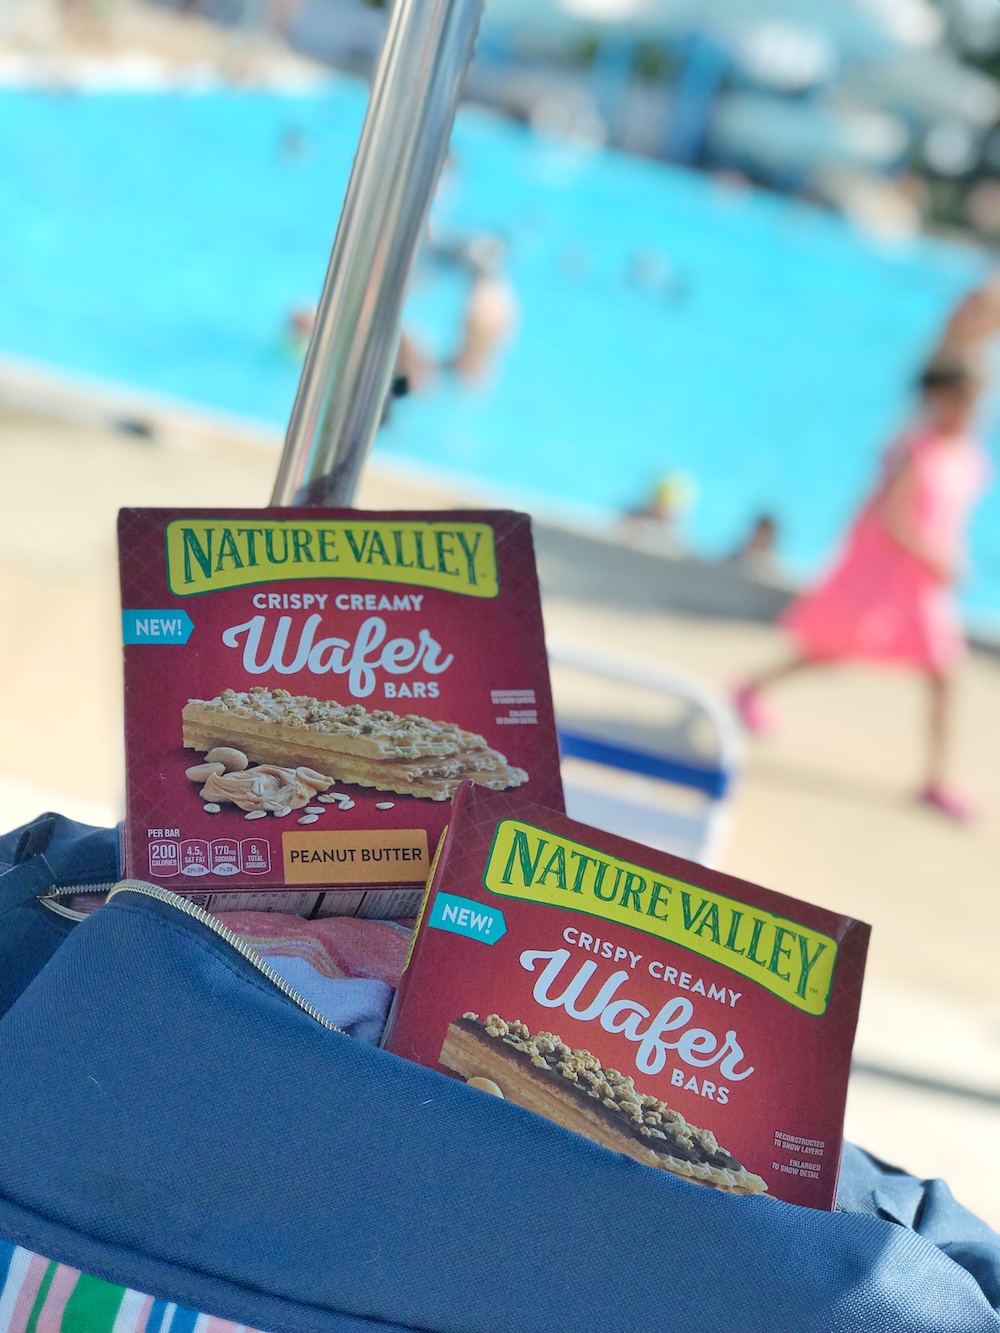 Nature Valley Wafer bars